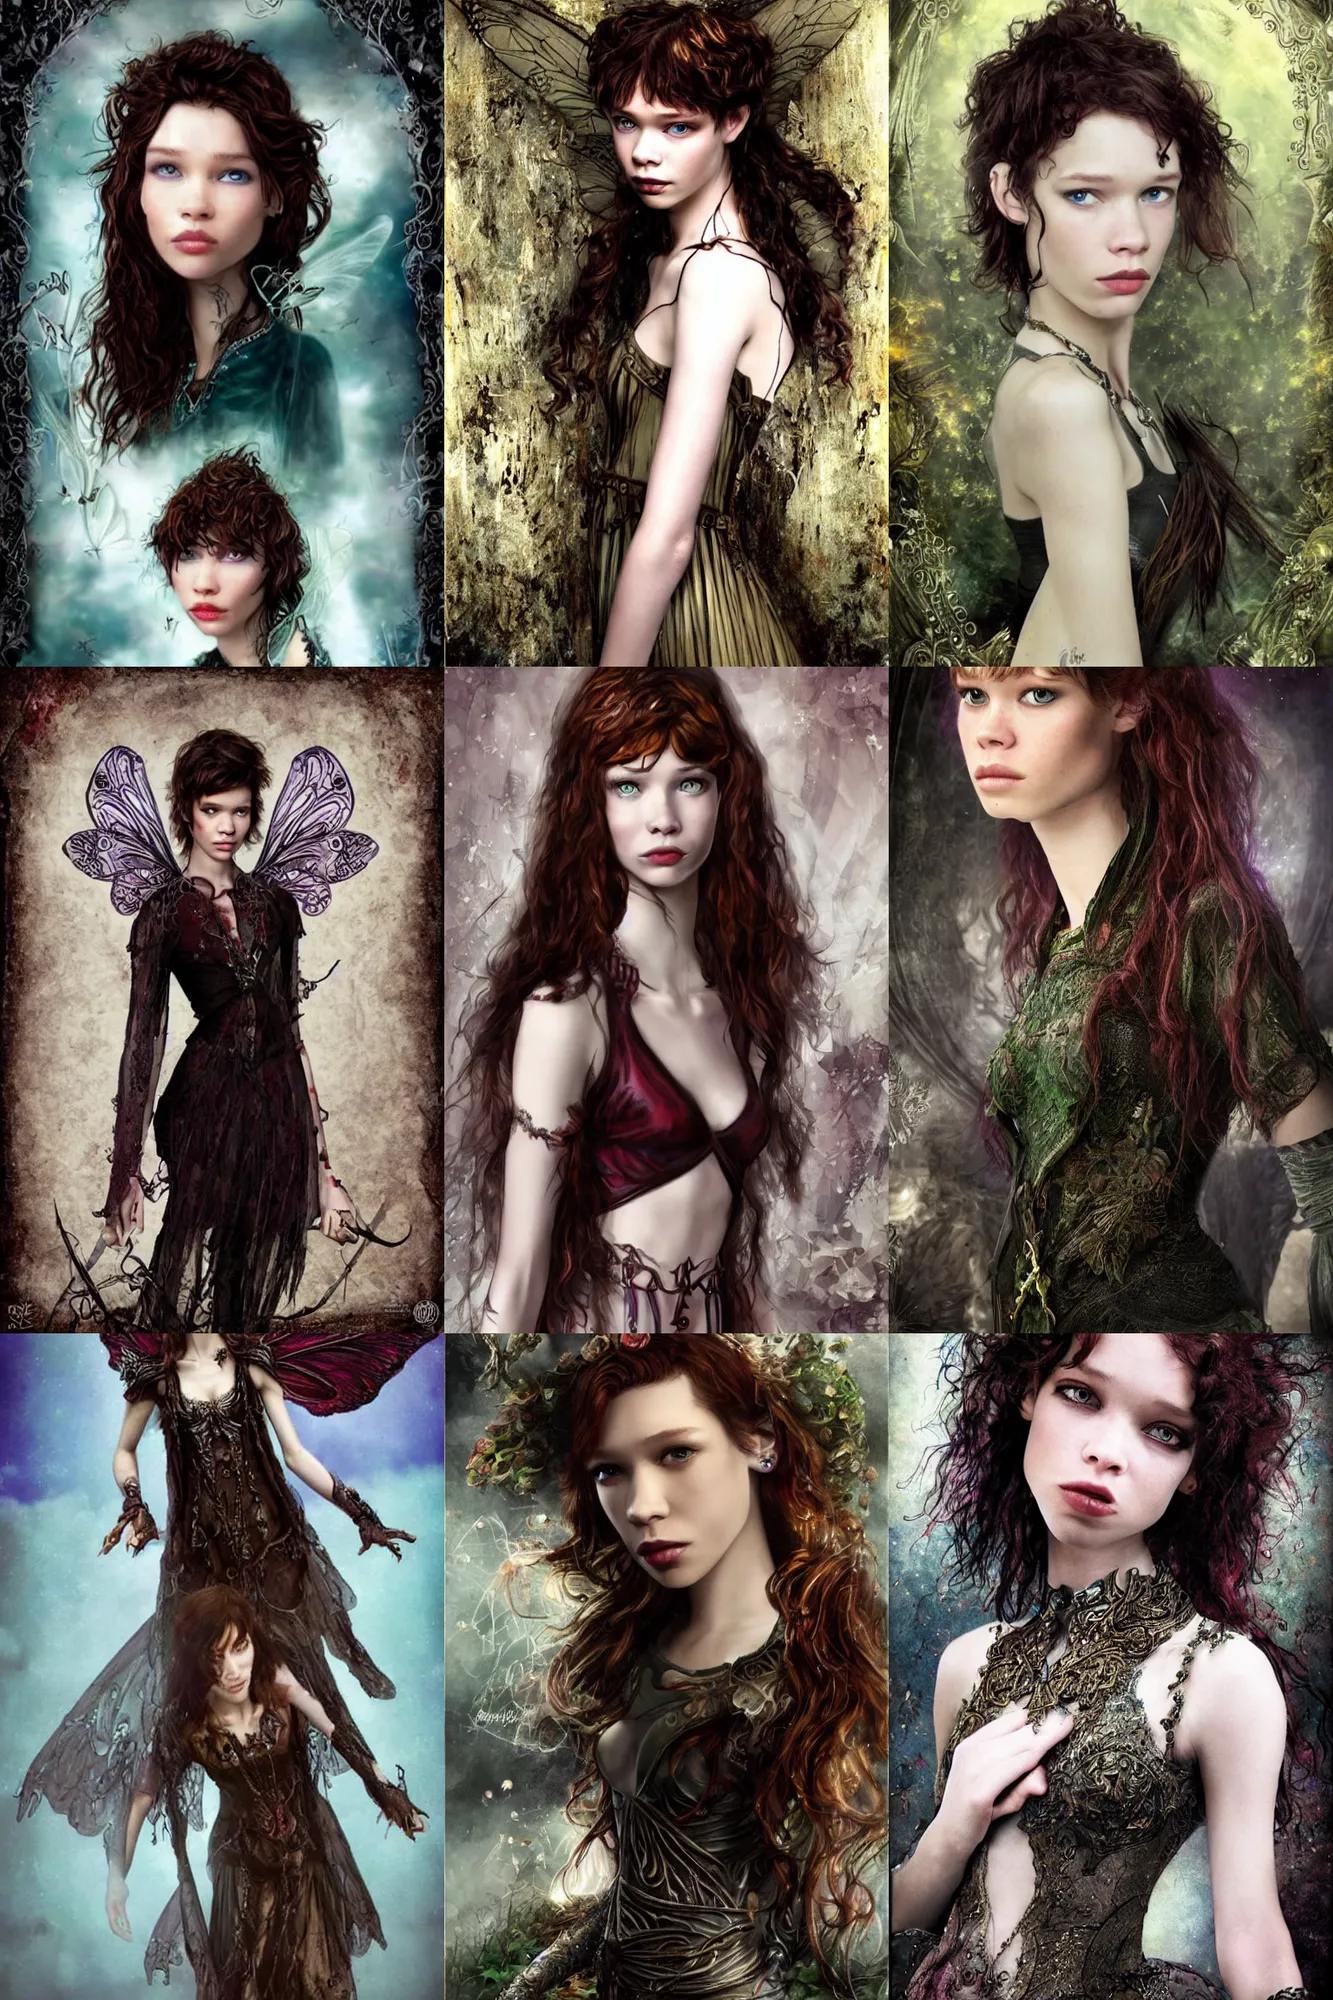 Prompt: astrid berges frisbey as a pixie in the style of anne stokes